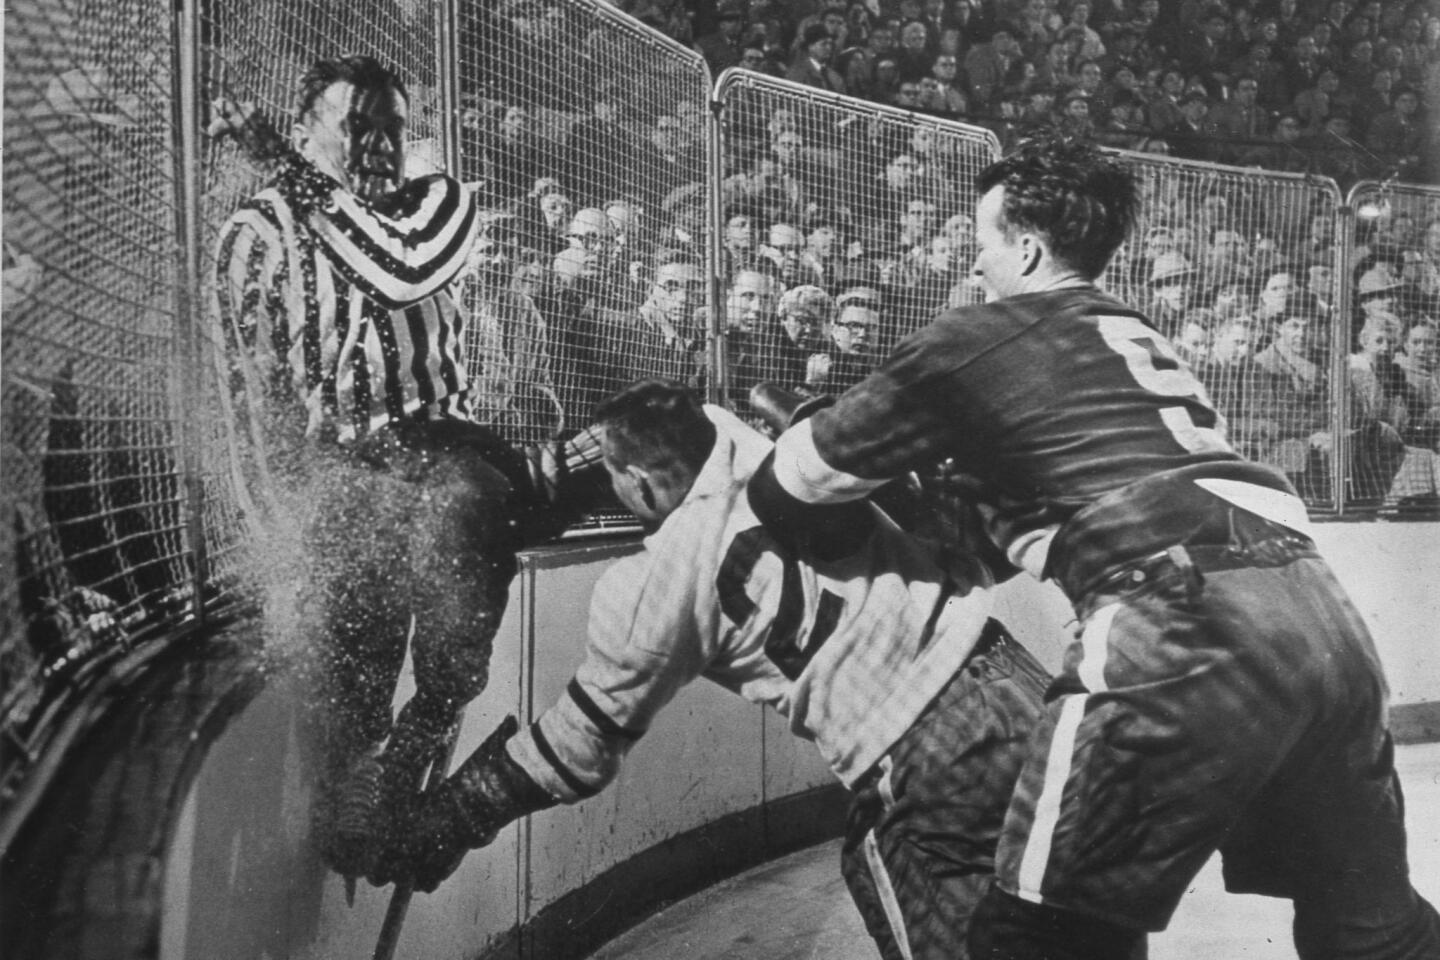 Bobby Hull Of Jets At Madison Square by B Bennett